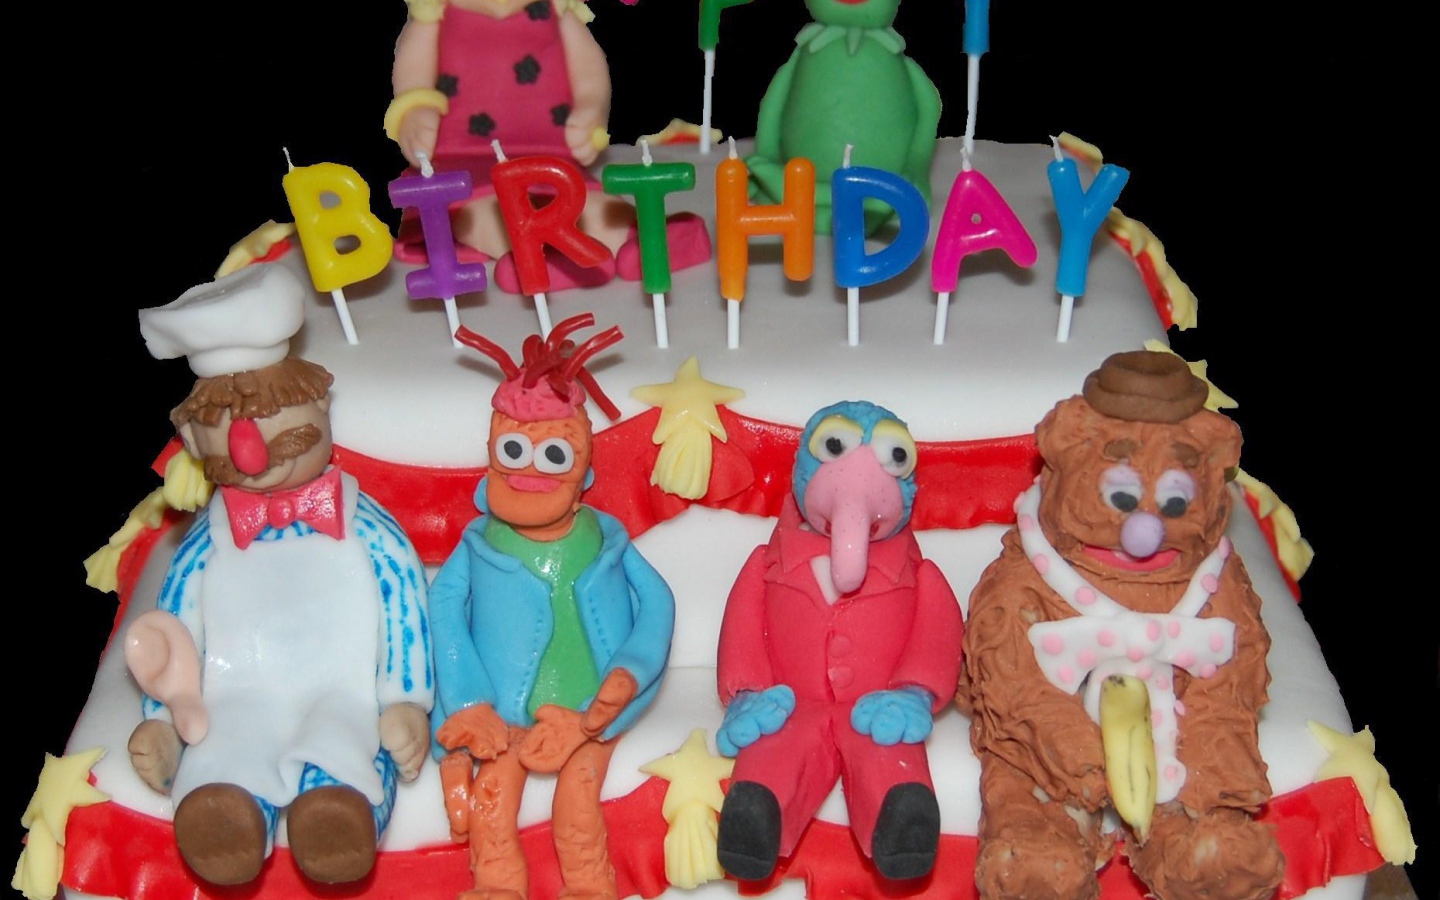 The cake for the birthday with puppets